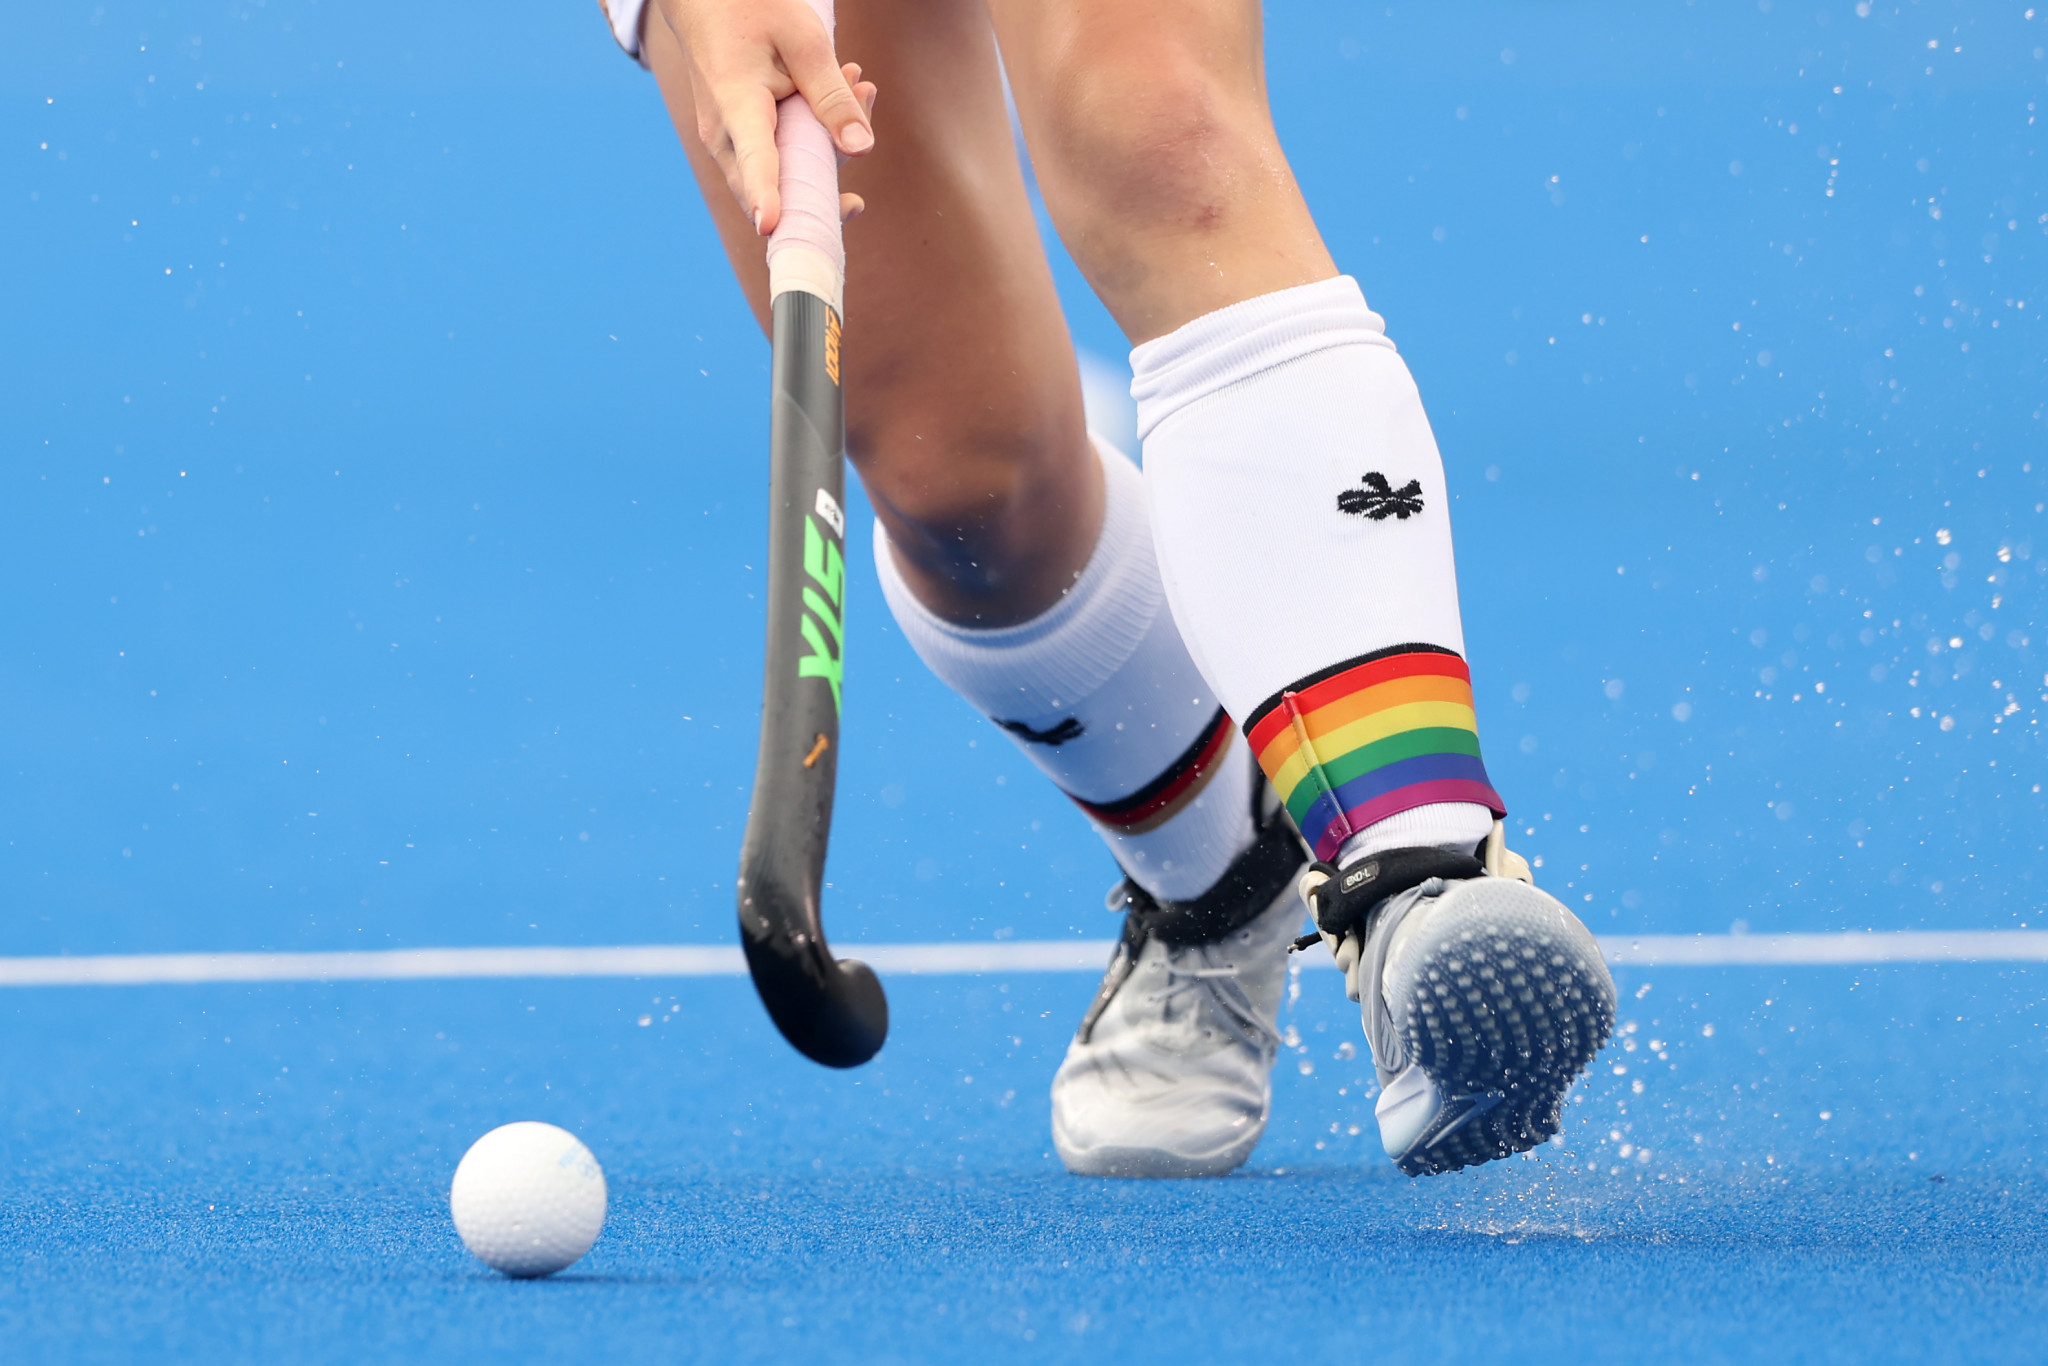 Exclusive: International Hockey Federation finances rebound after painful COVID-19 hangover